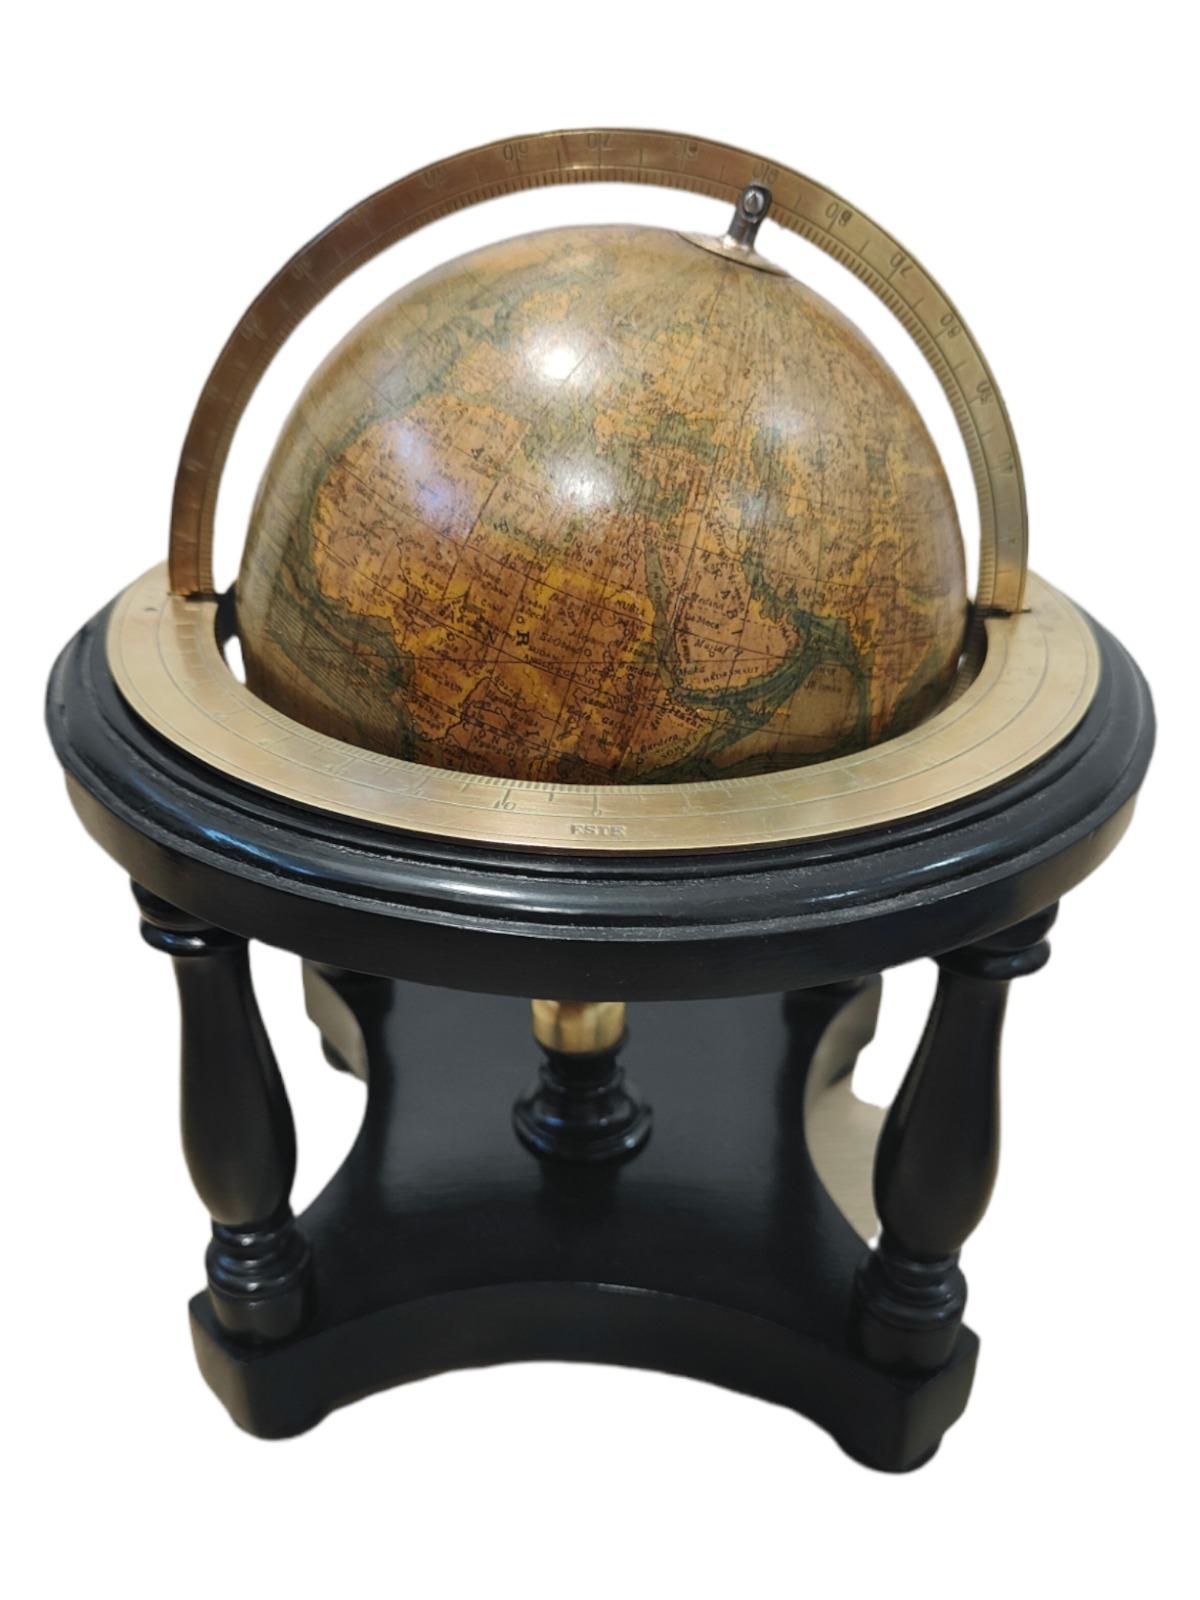 Rare Paluzie globe from the XIX century. Desktop globe from the xix century made by the house: Faustino Paluzie-Barcelona. The base is made of ebonized wood and the globe, due to its weight, is possibly solid wood. Measures: 18 x 18 x 25 cm. Balloon